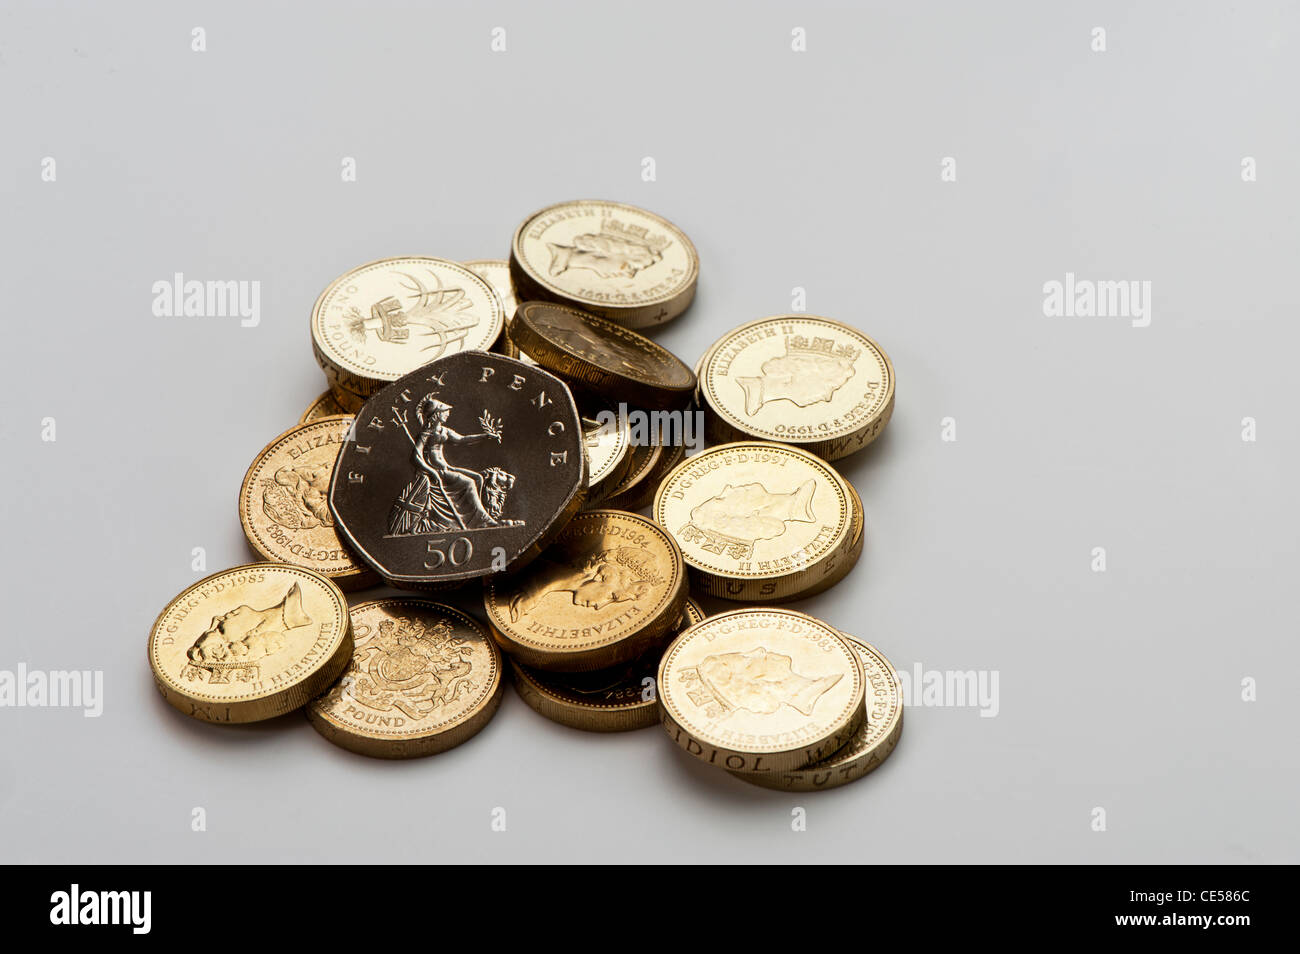 pound coins with 50p coin Stock Photo